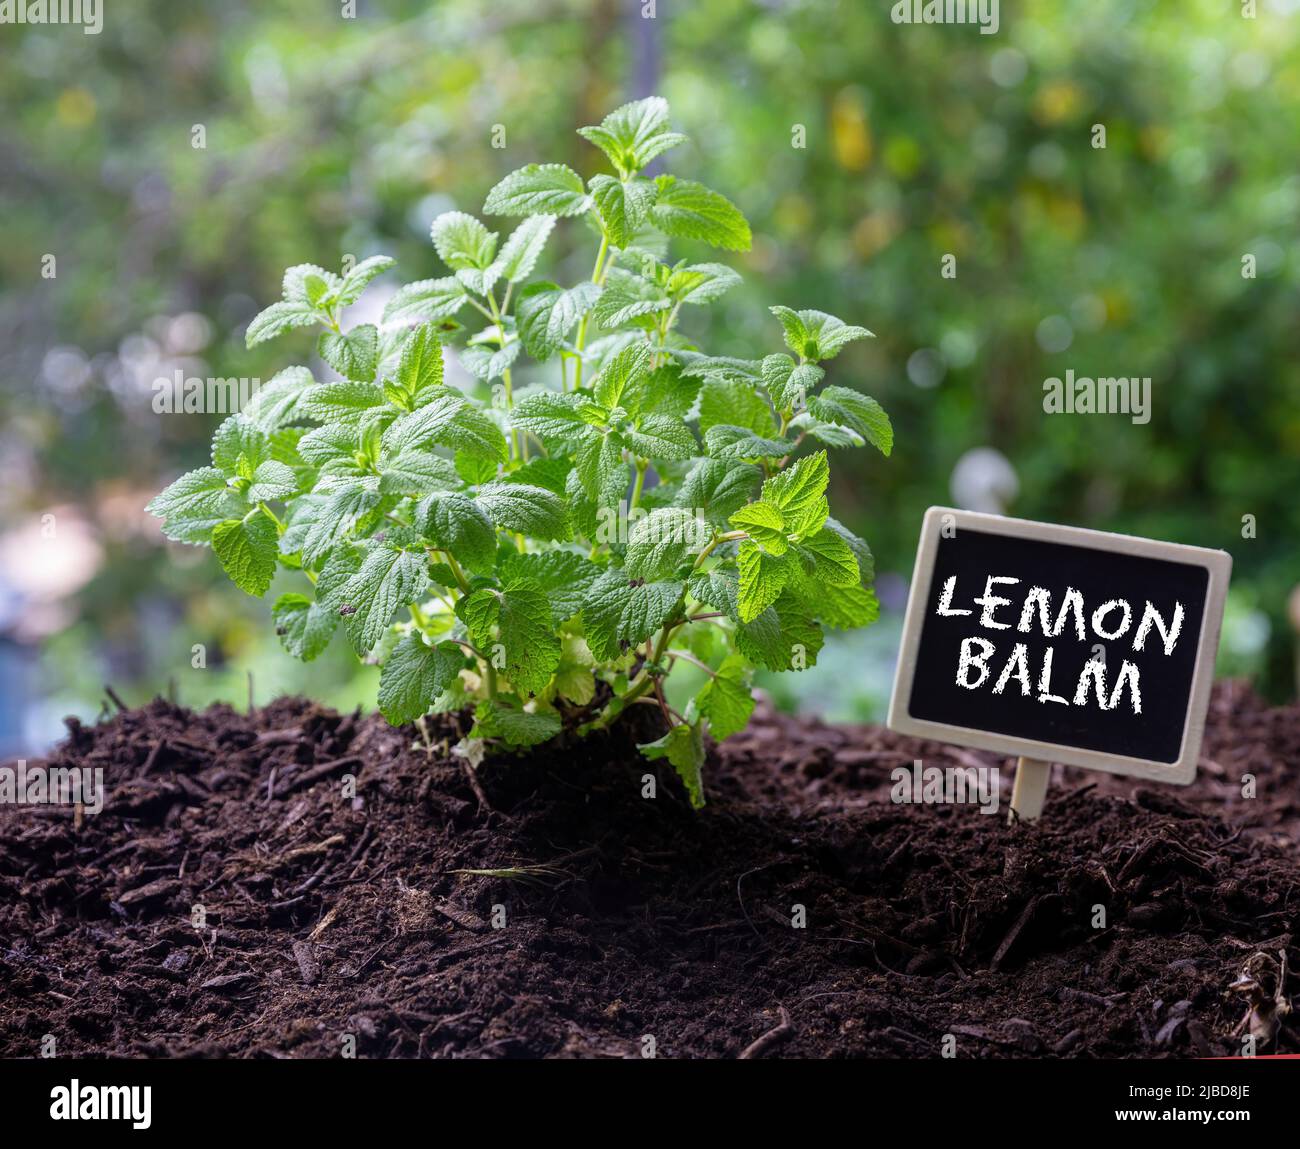 Lemon balm aromatic herb and text label. Melissa officinalis plant ingredient of Carmelite water in soil, close up view. Stock Photo